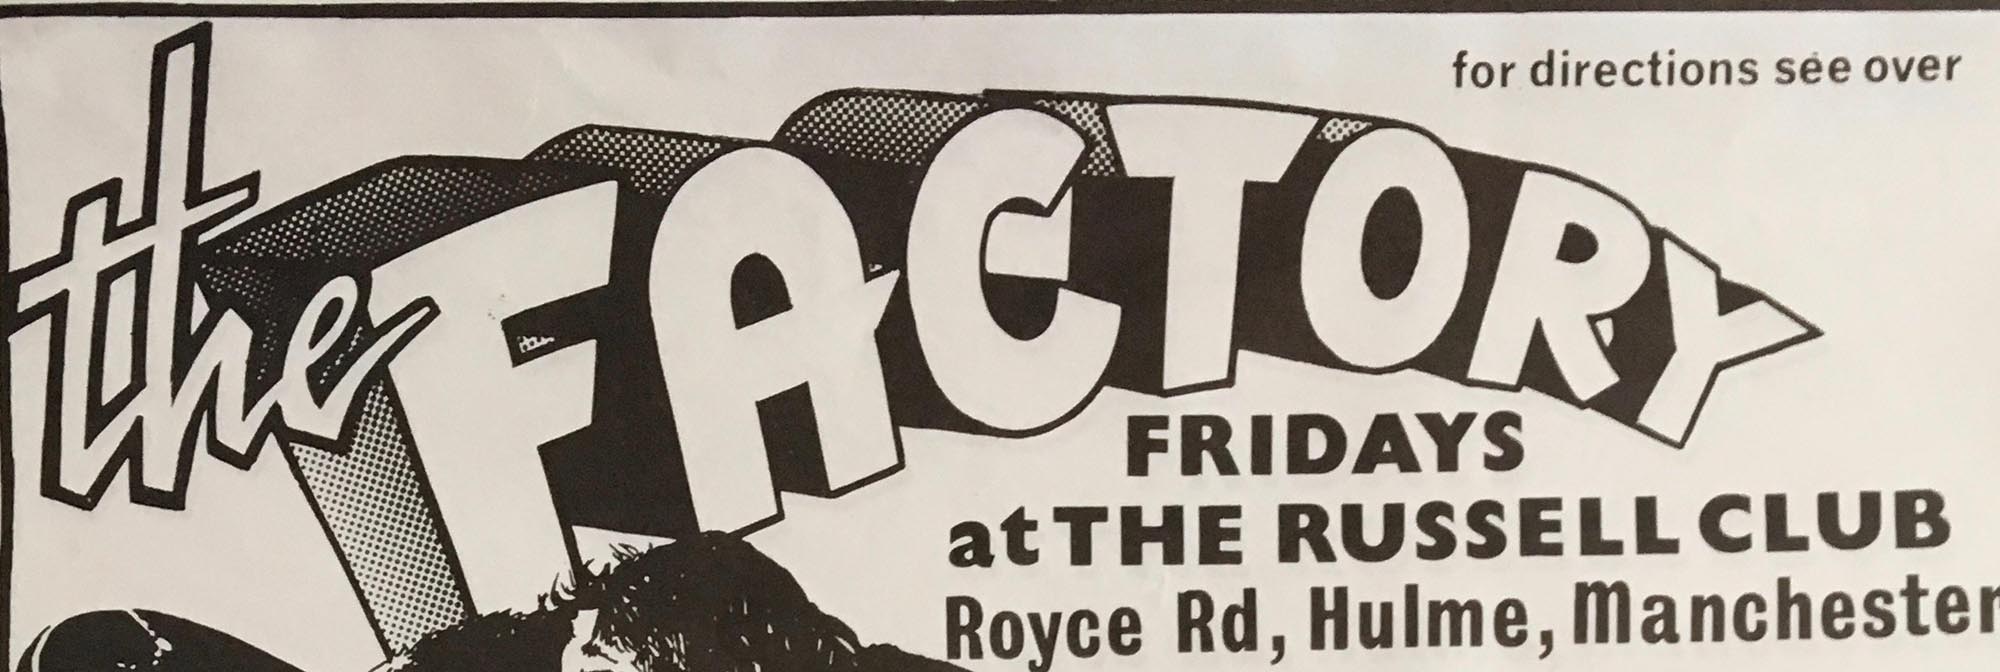 Detail of poster with black text on a light background. Text reads: The Factory, Fridays at The Russell Club, Royce Rd, Hulme, Manchester. For directions see over.